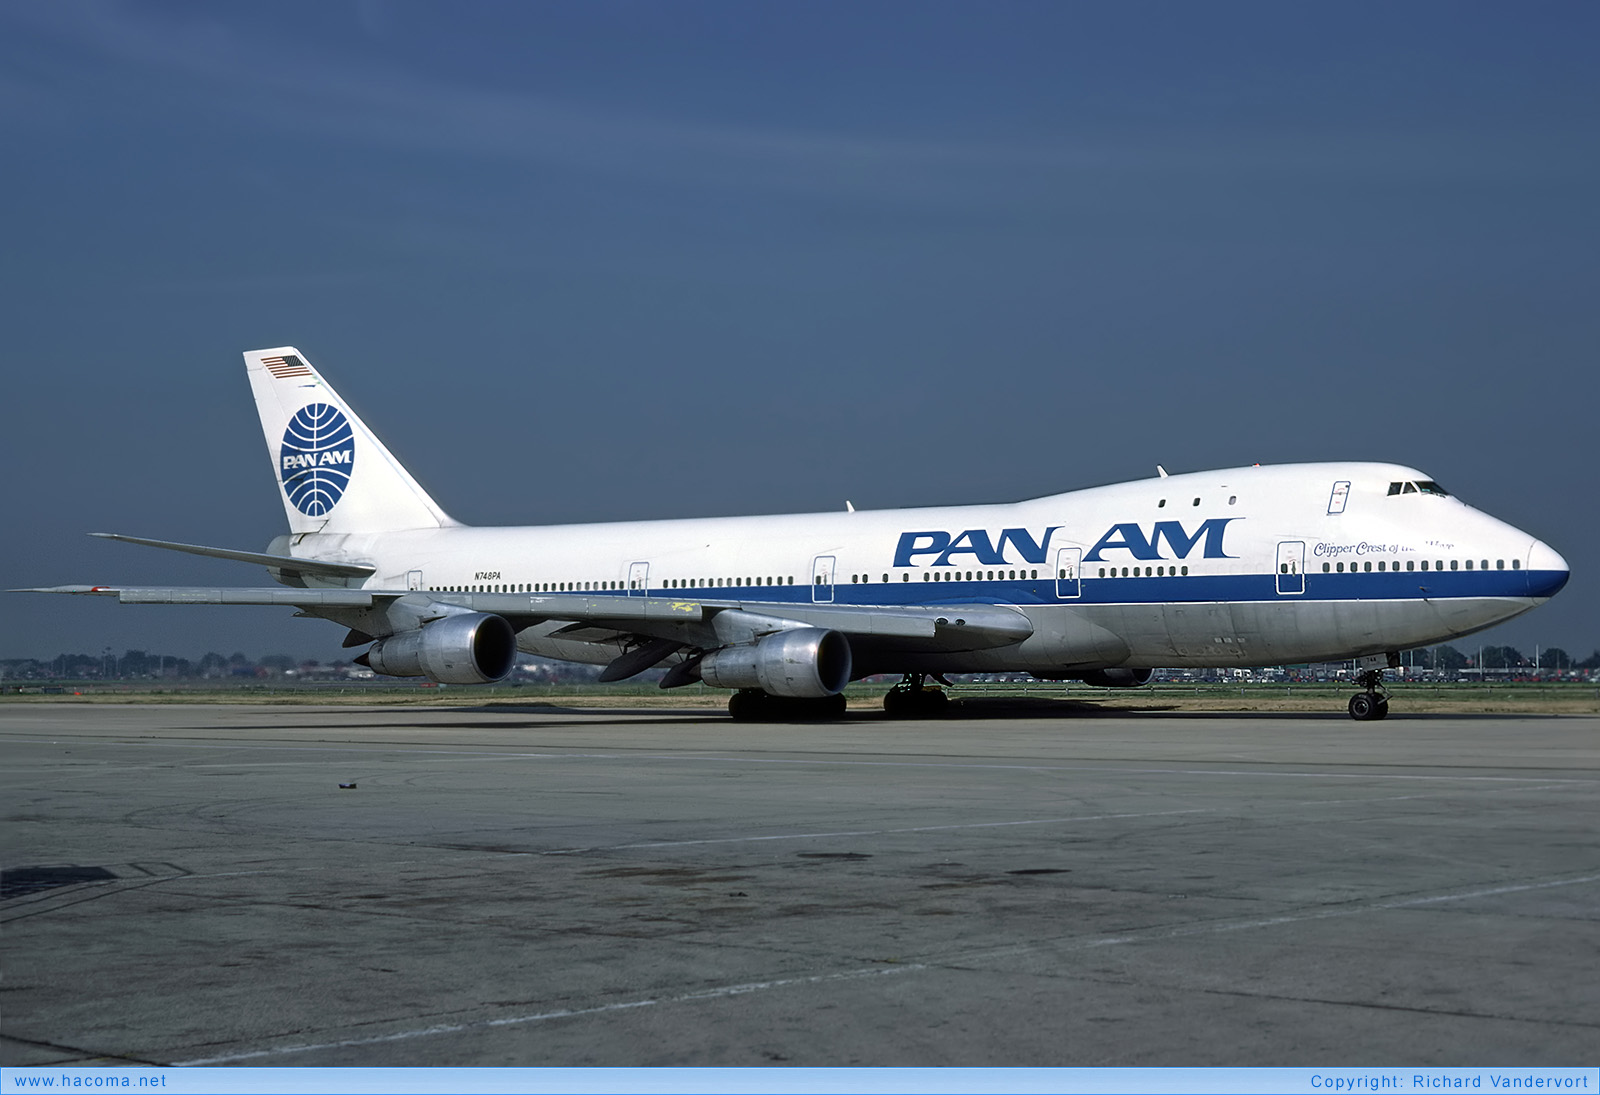 Photo of N748PA - Pan Am Clipper Hornet / Crest of the Wave - London Heathrow Airport - Oct 1985